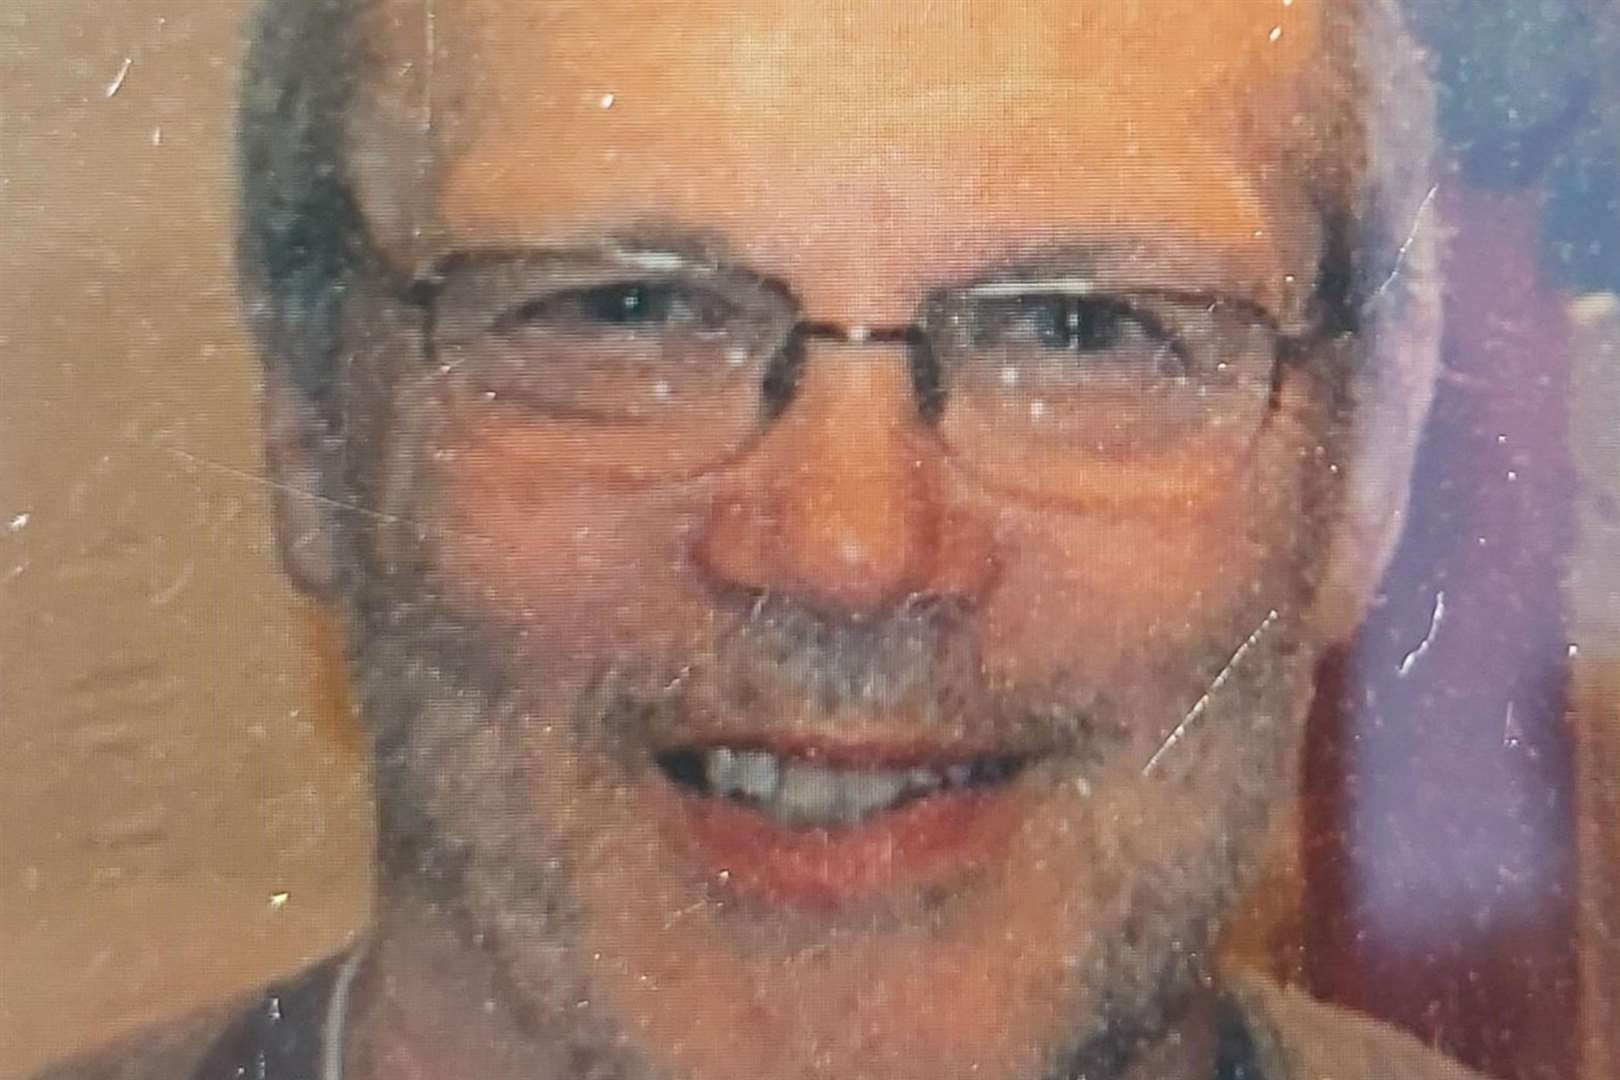 Police are increasingly concerned about missing Wayne Leppard. Photo: Kent Police